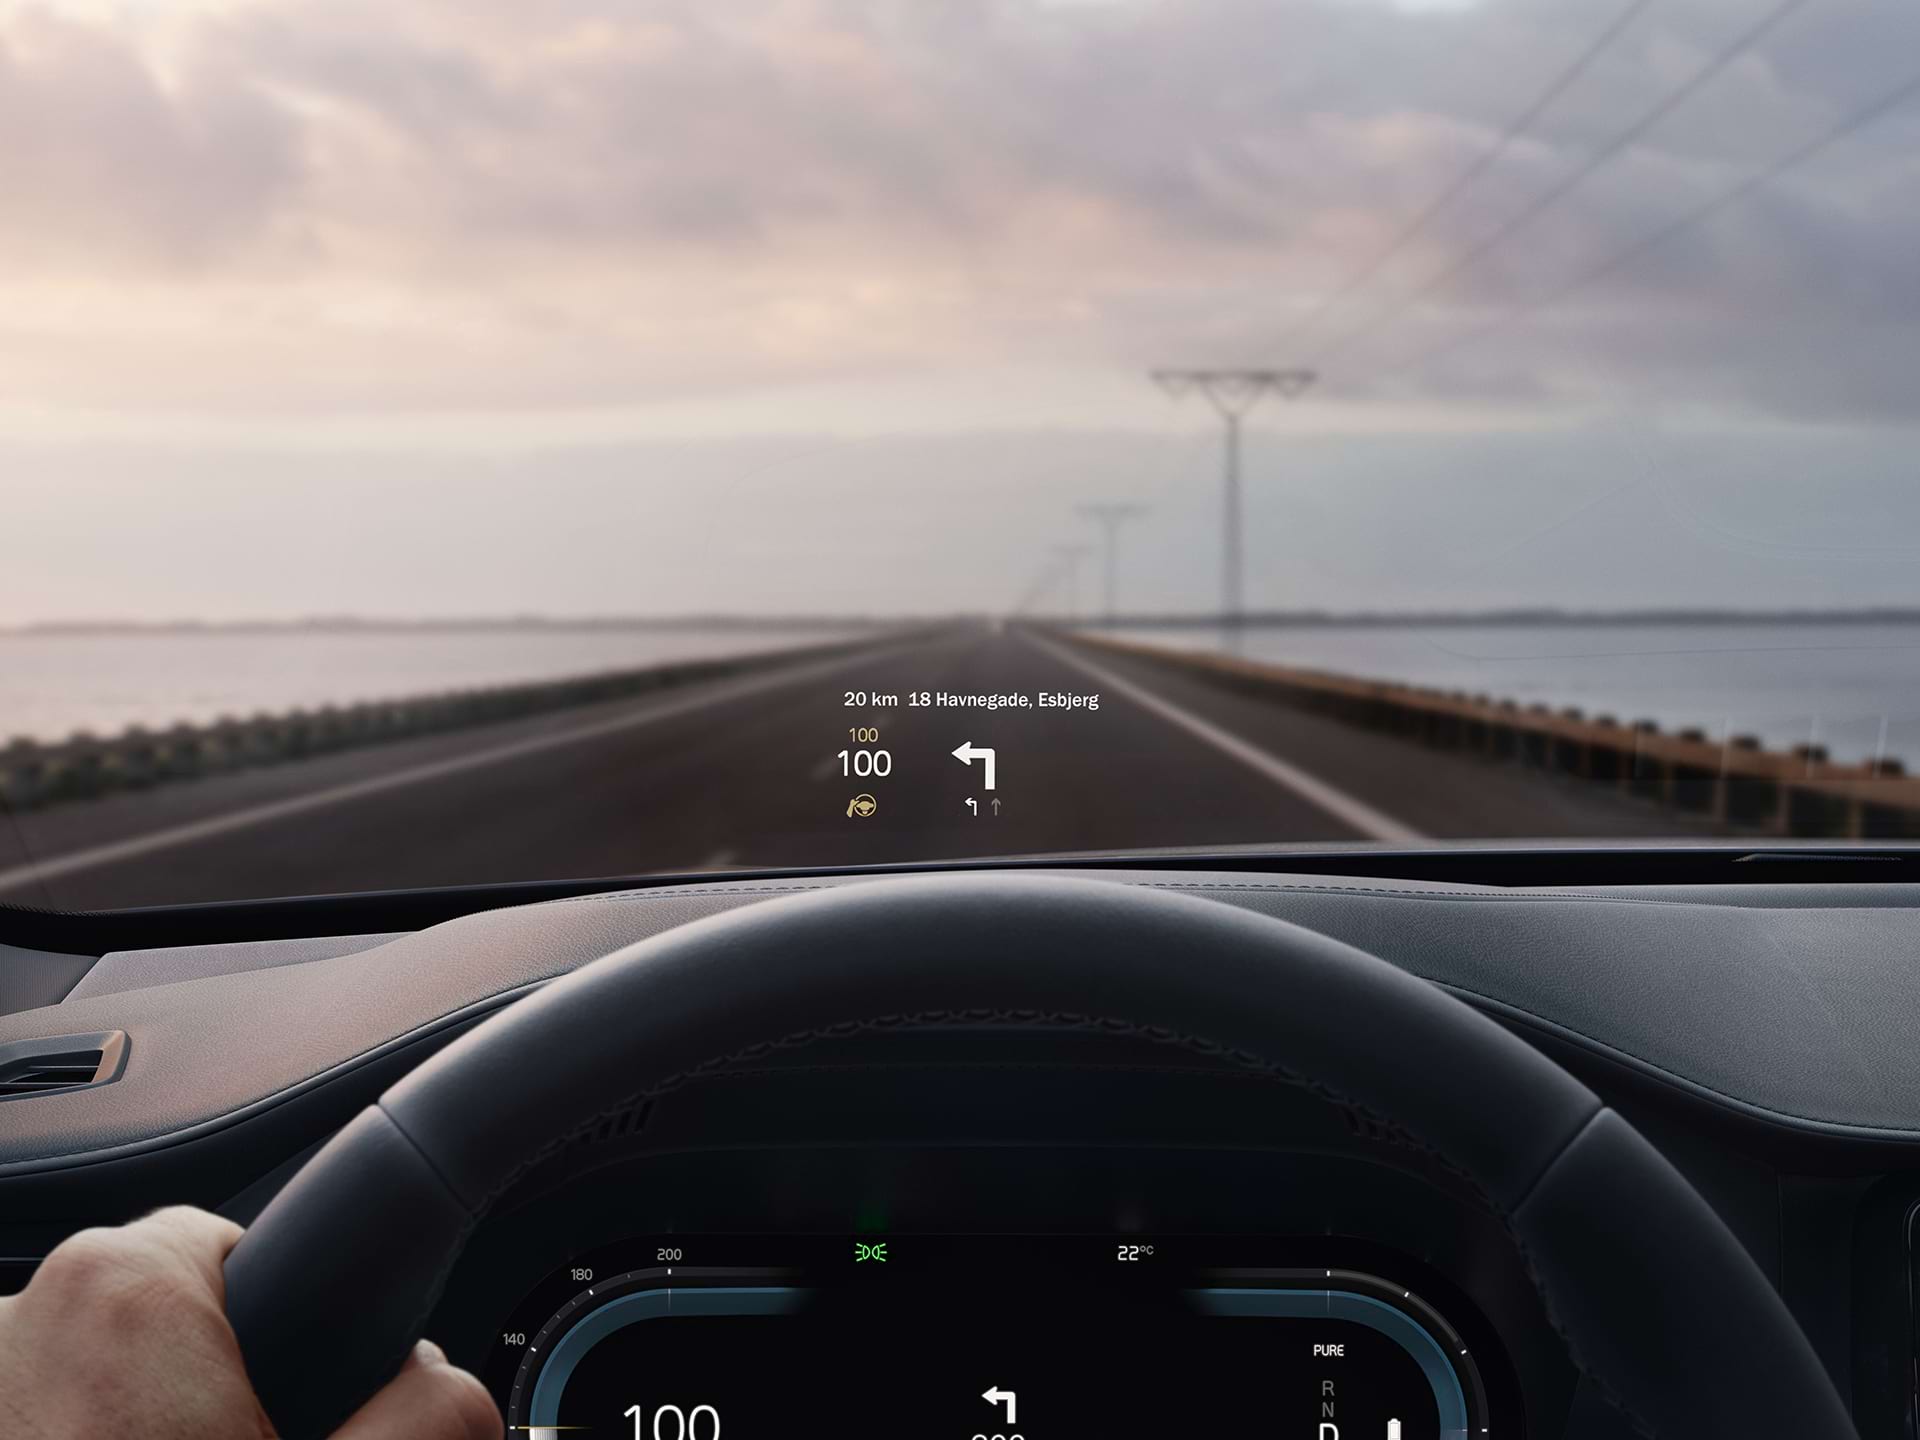 A driver's view of the head-up display appearing on the windshield of their Volvo car.